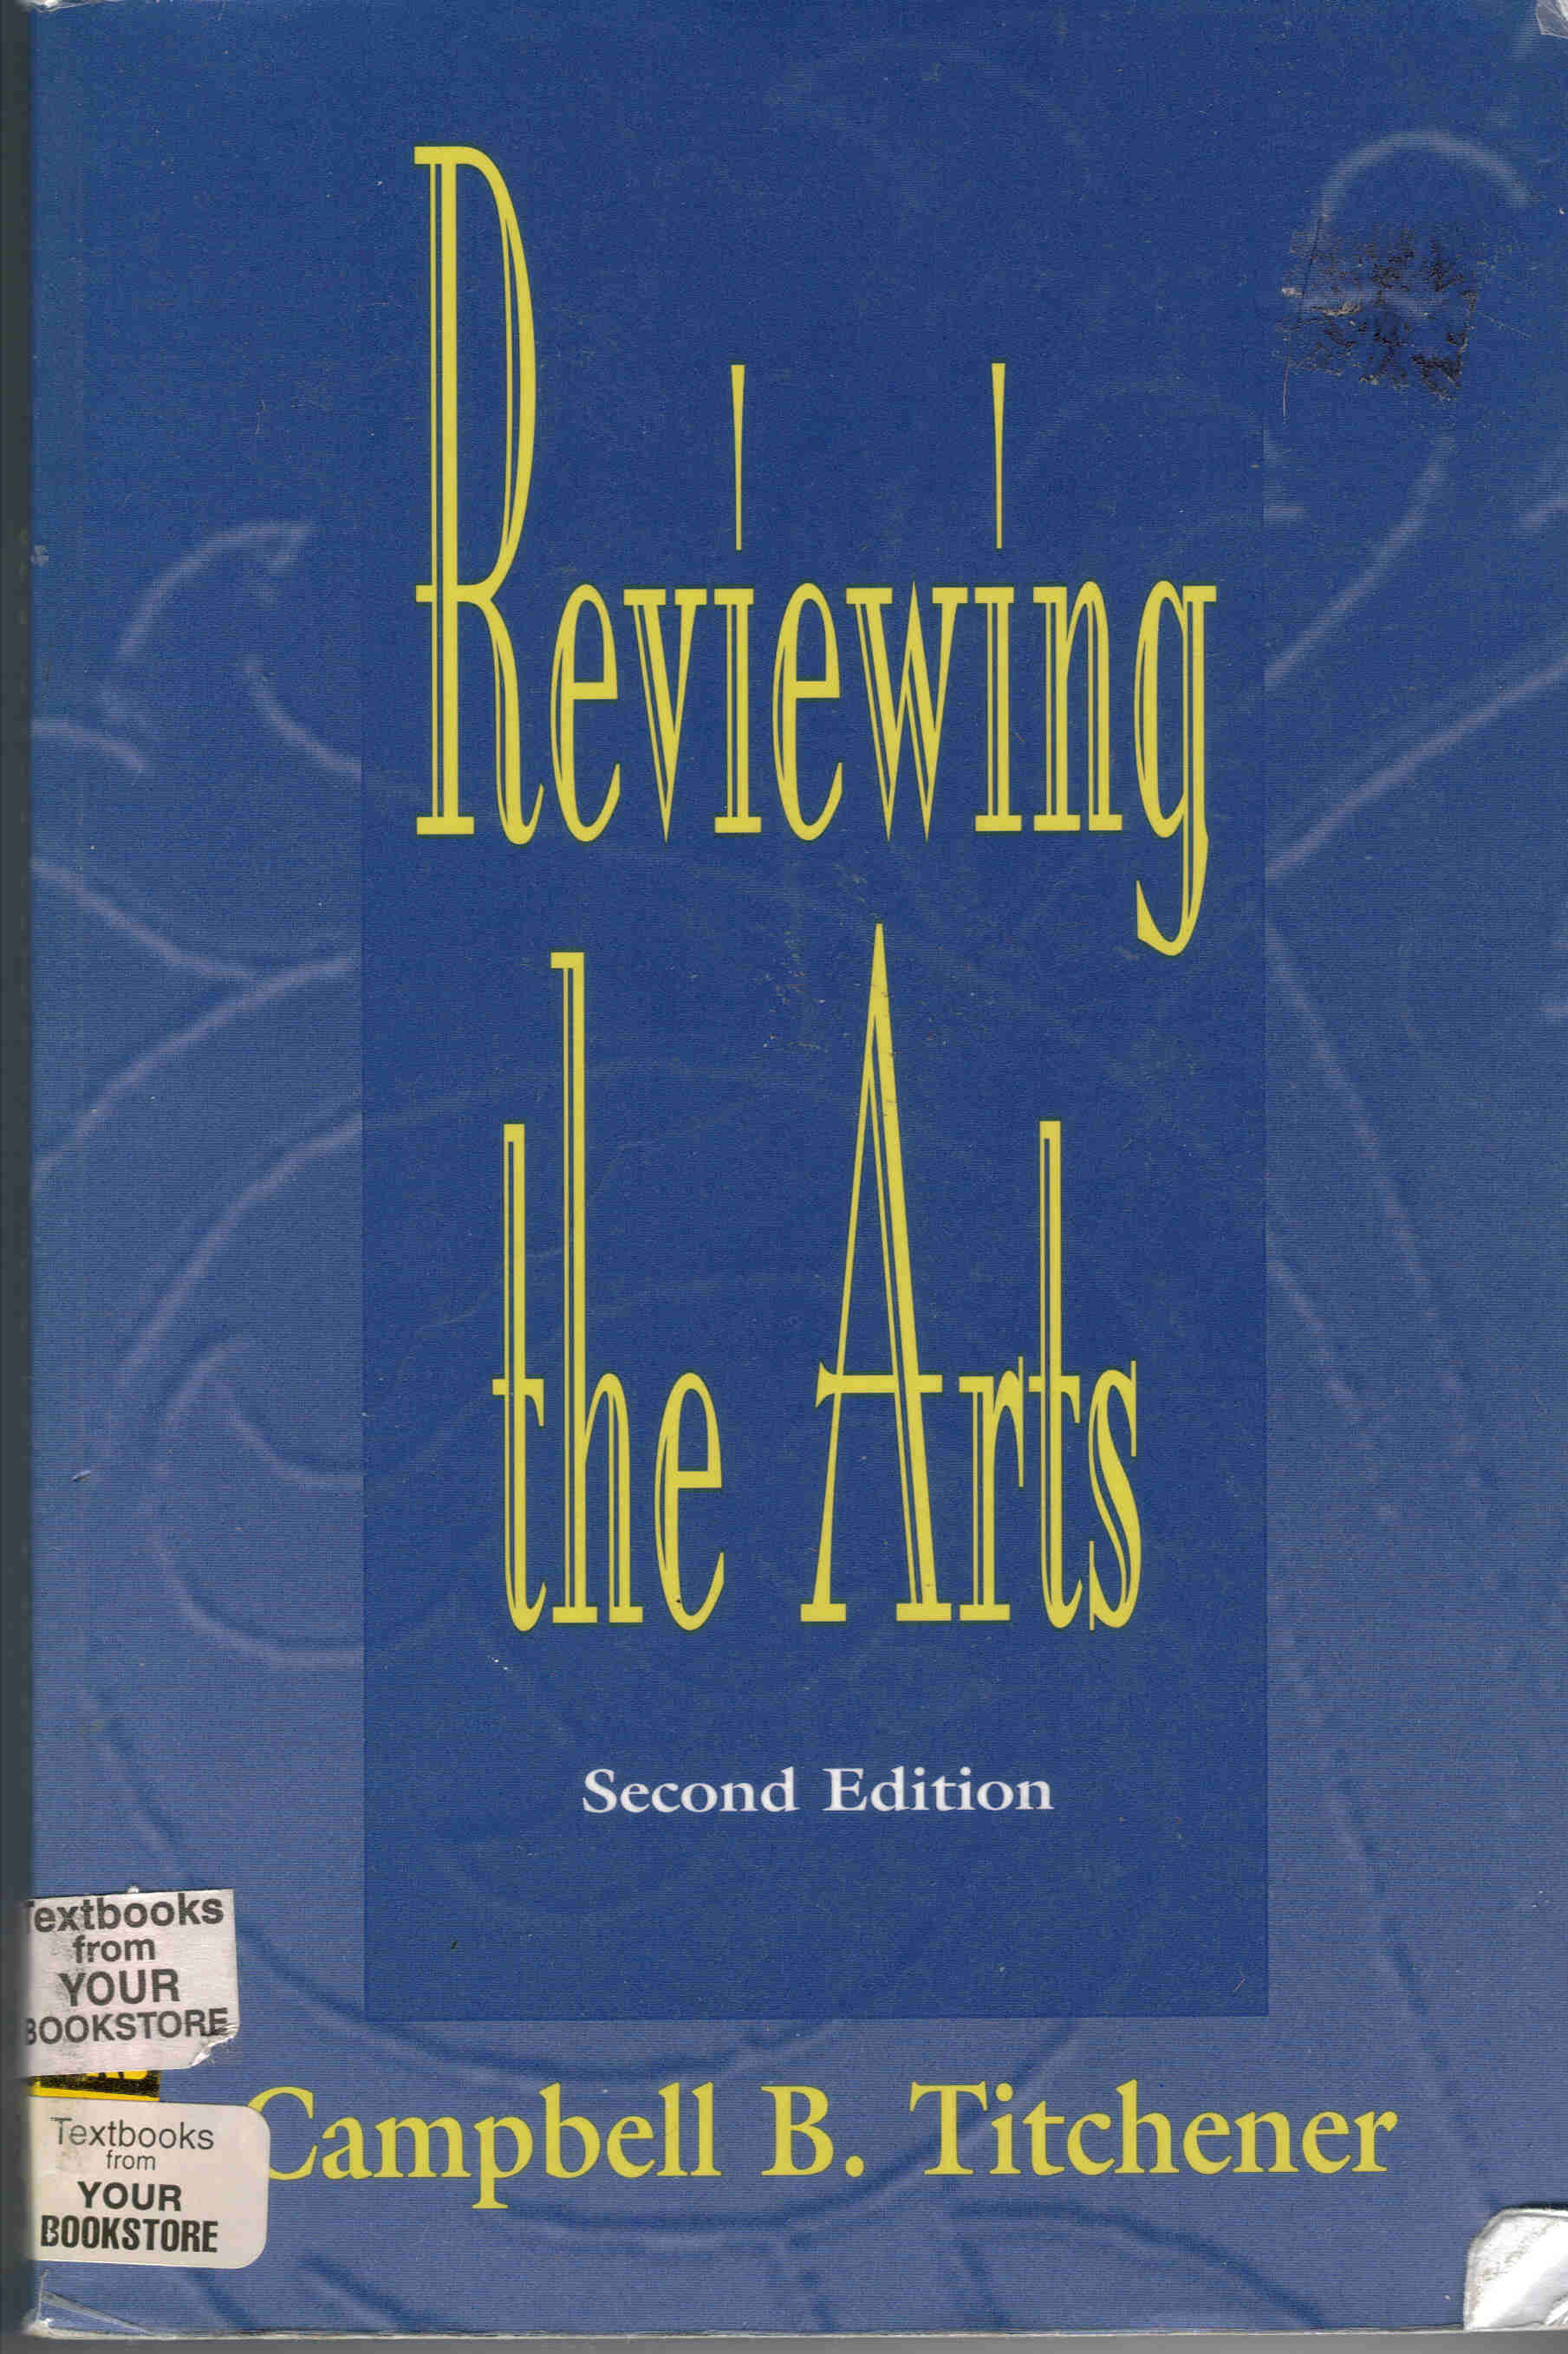 reviewingtheartsbook.jpg, warren f disbrow, warren disbrow, ny times, invasion for flesh and blood, flesh eaters from outer space, scarlet moon, dark beginnings, haunted hay ride, haunting of holly house, romero, king, forry ackerman, horror, new jersey, feature filmmaker, auteur, classic horror, sex, violence, thrillers, graphic horror,  haunting of holly house, michael bruce, clerks, smith, great movie, star trek, godzilla, exorcist, blood, monsters, france, england, germany, russia, italy, usa, fantastic